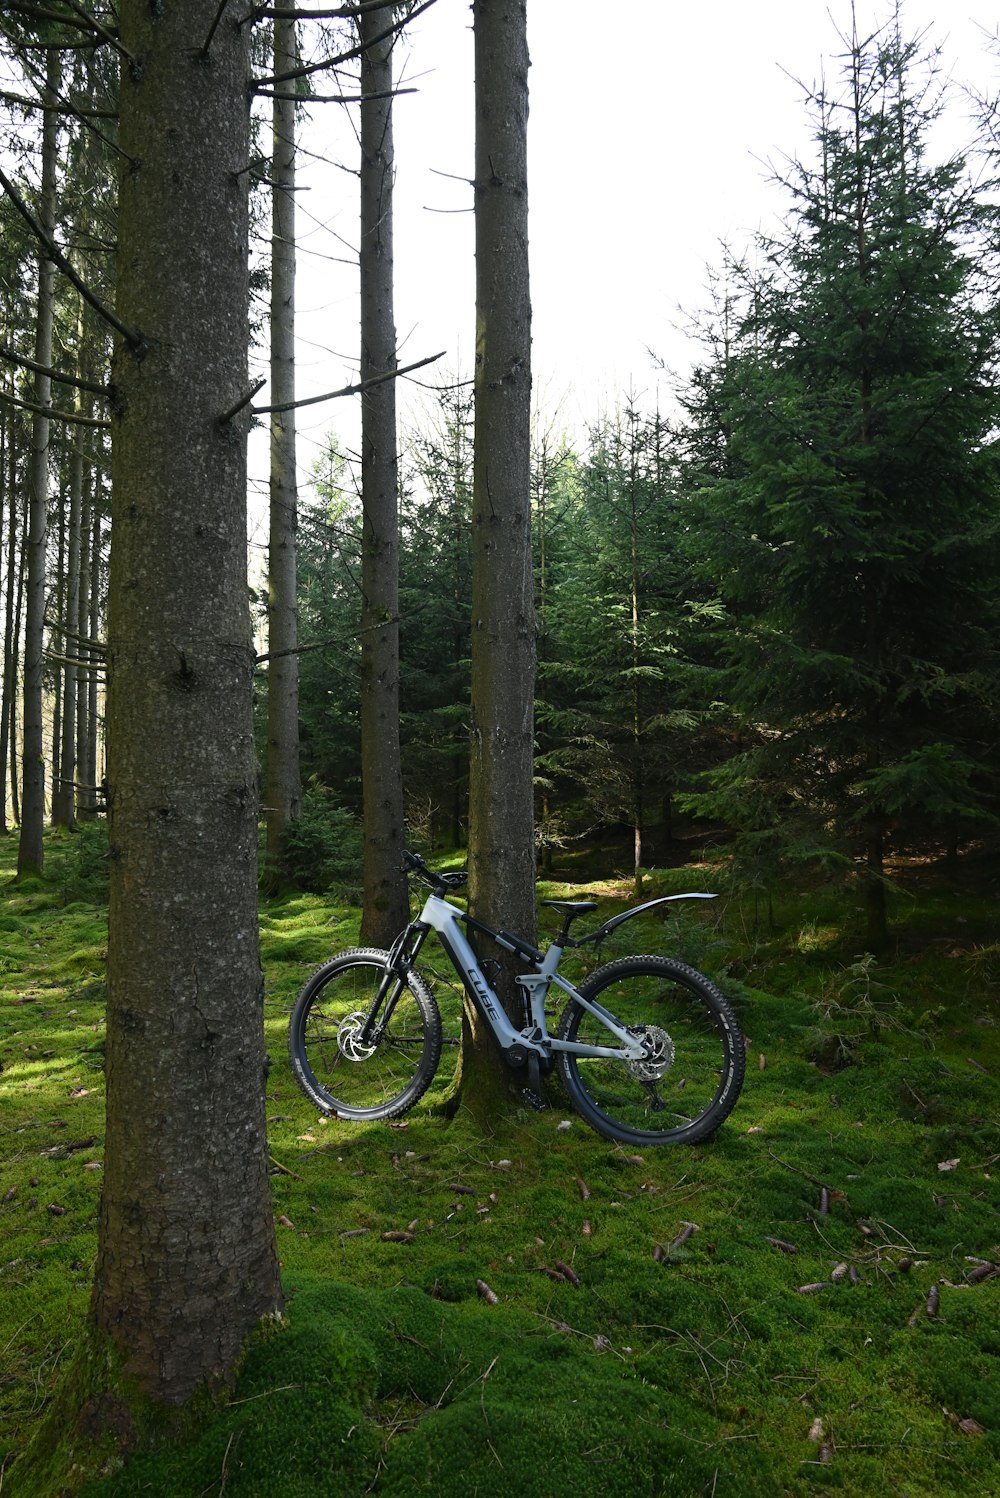 a bike leaning against a tree in a forest